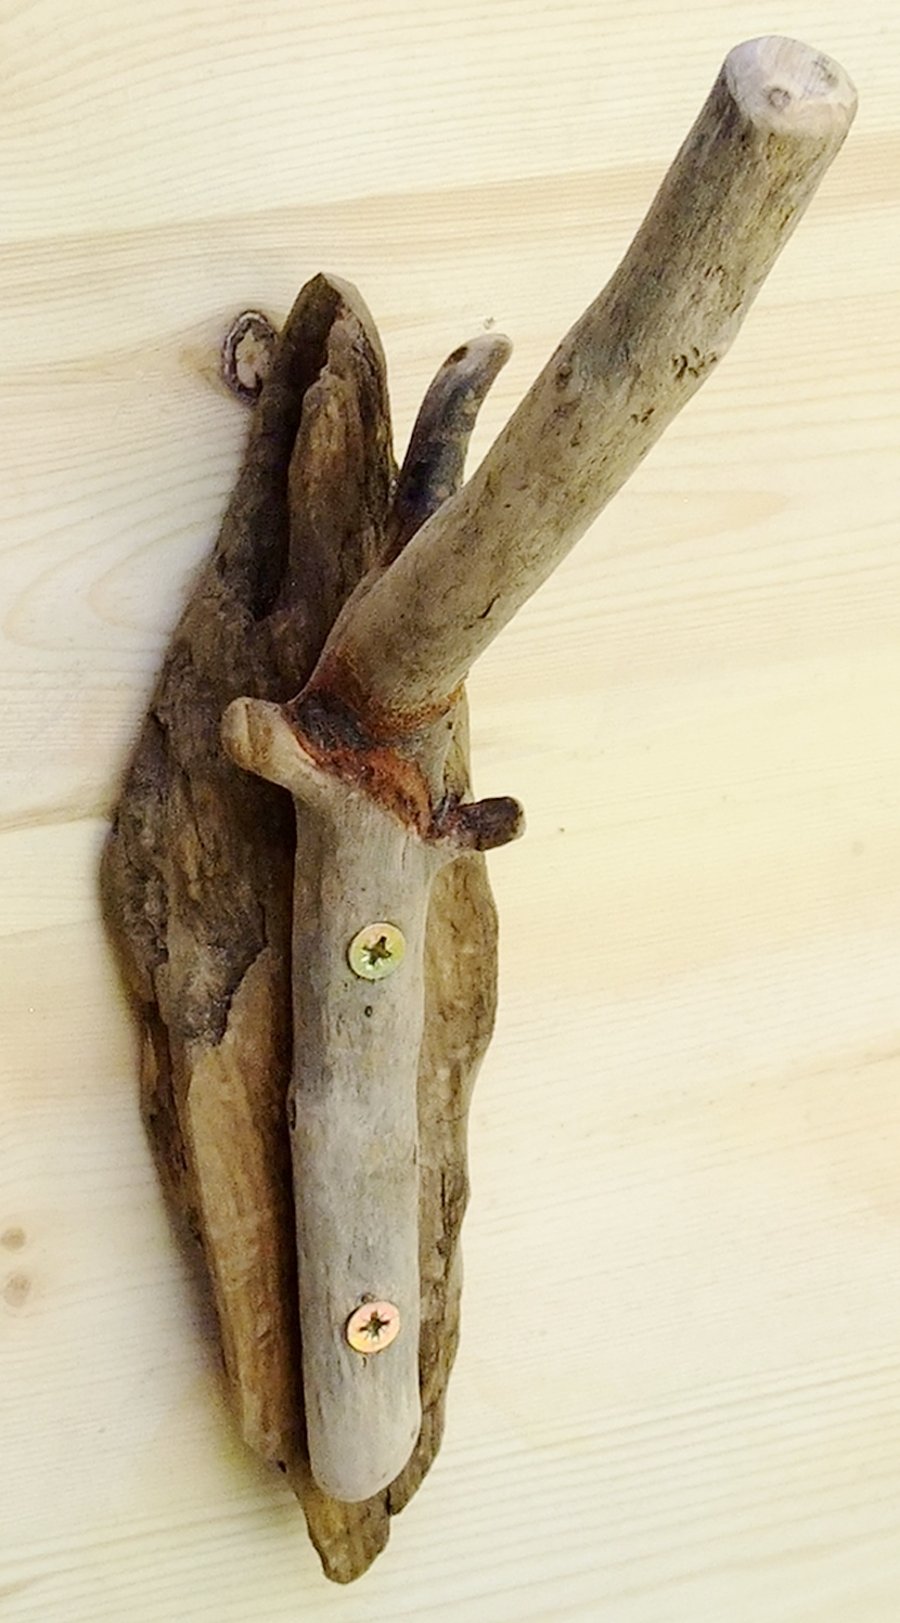 Driftwood toilet roll holder for bathroom or toilet rustic & natural.